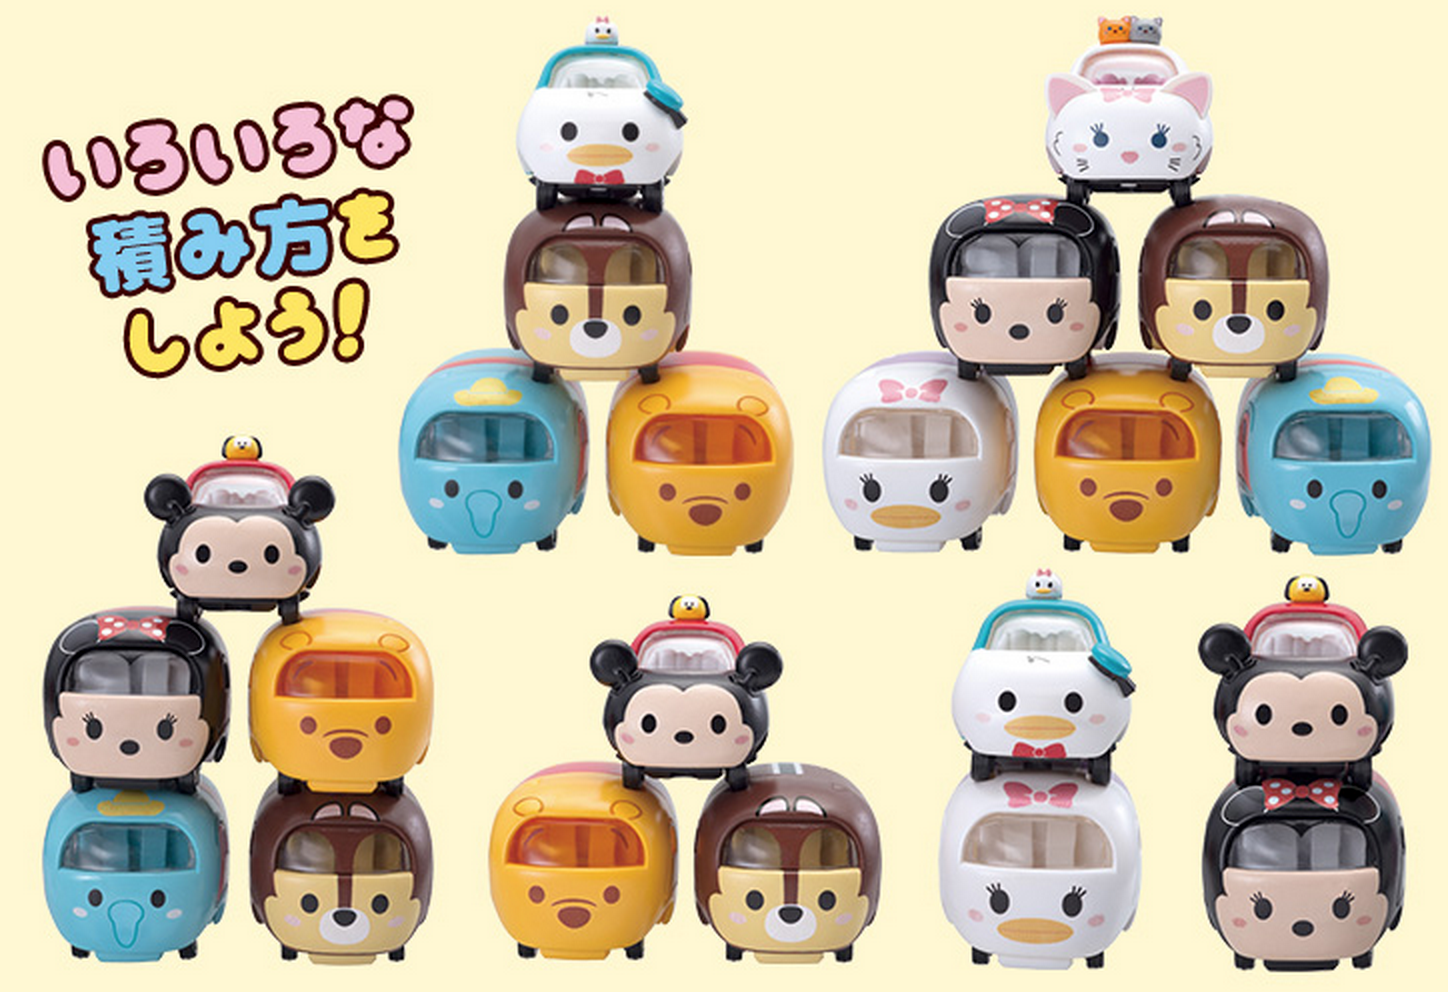 also has a range of Tsum Tsum merchandise that goes beyond plushies, cateri...